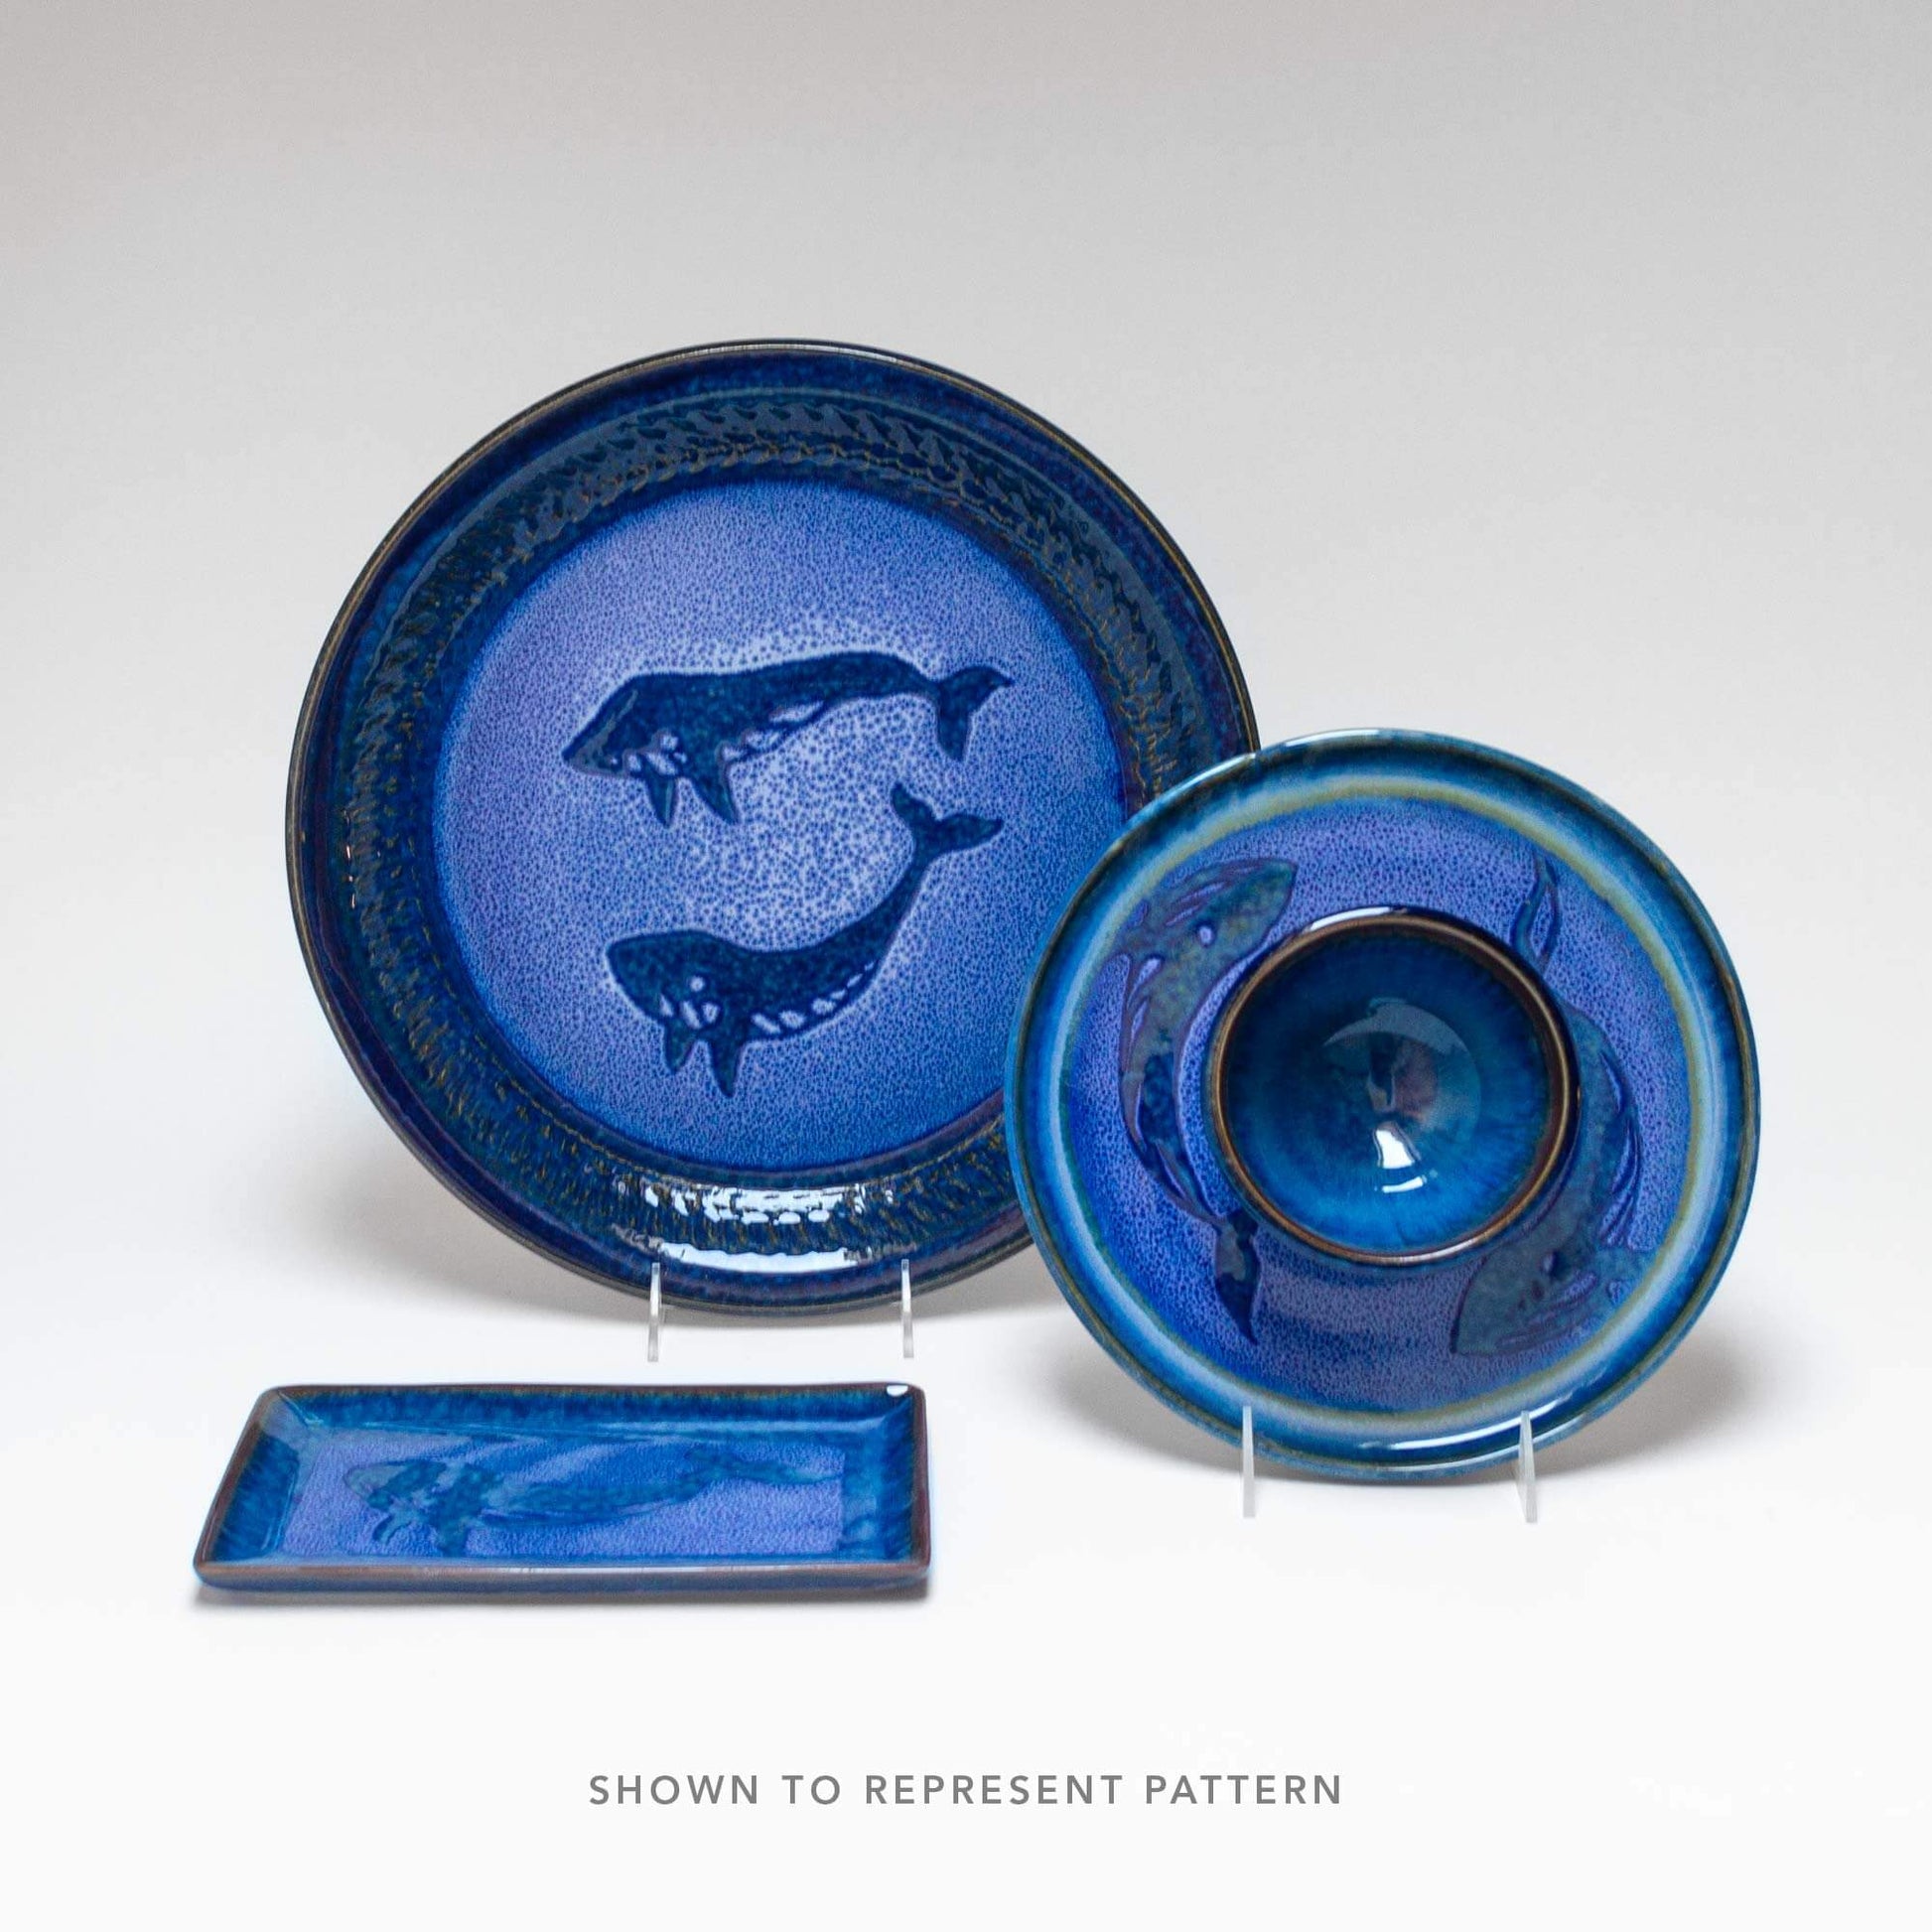 Handmade Pottery 15" Rimless Platter in Blue Whale pattern made by Georgetown Pottery in Maine